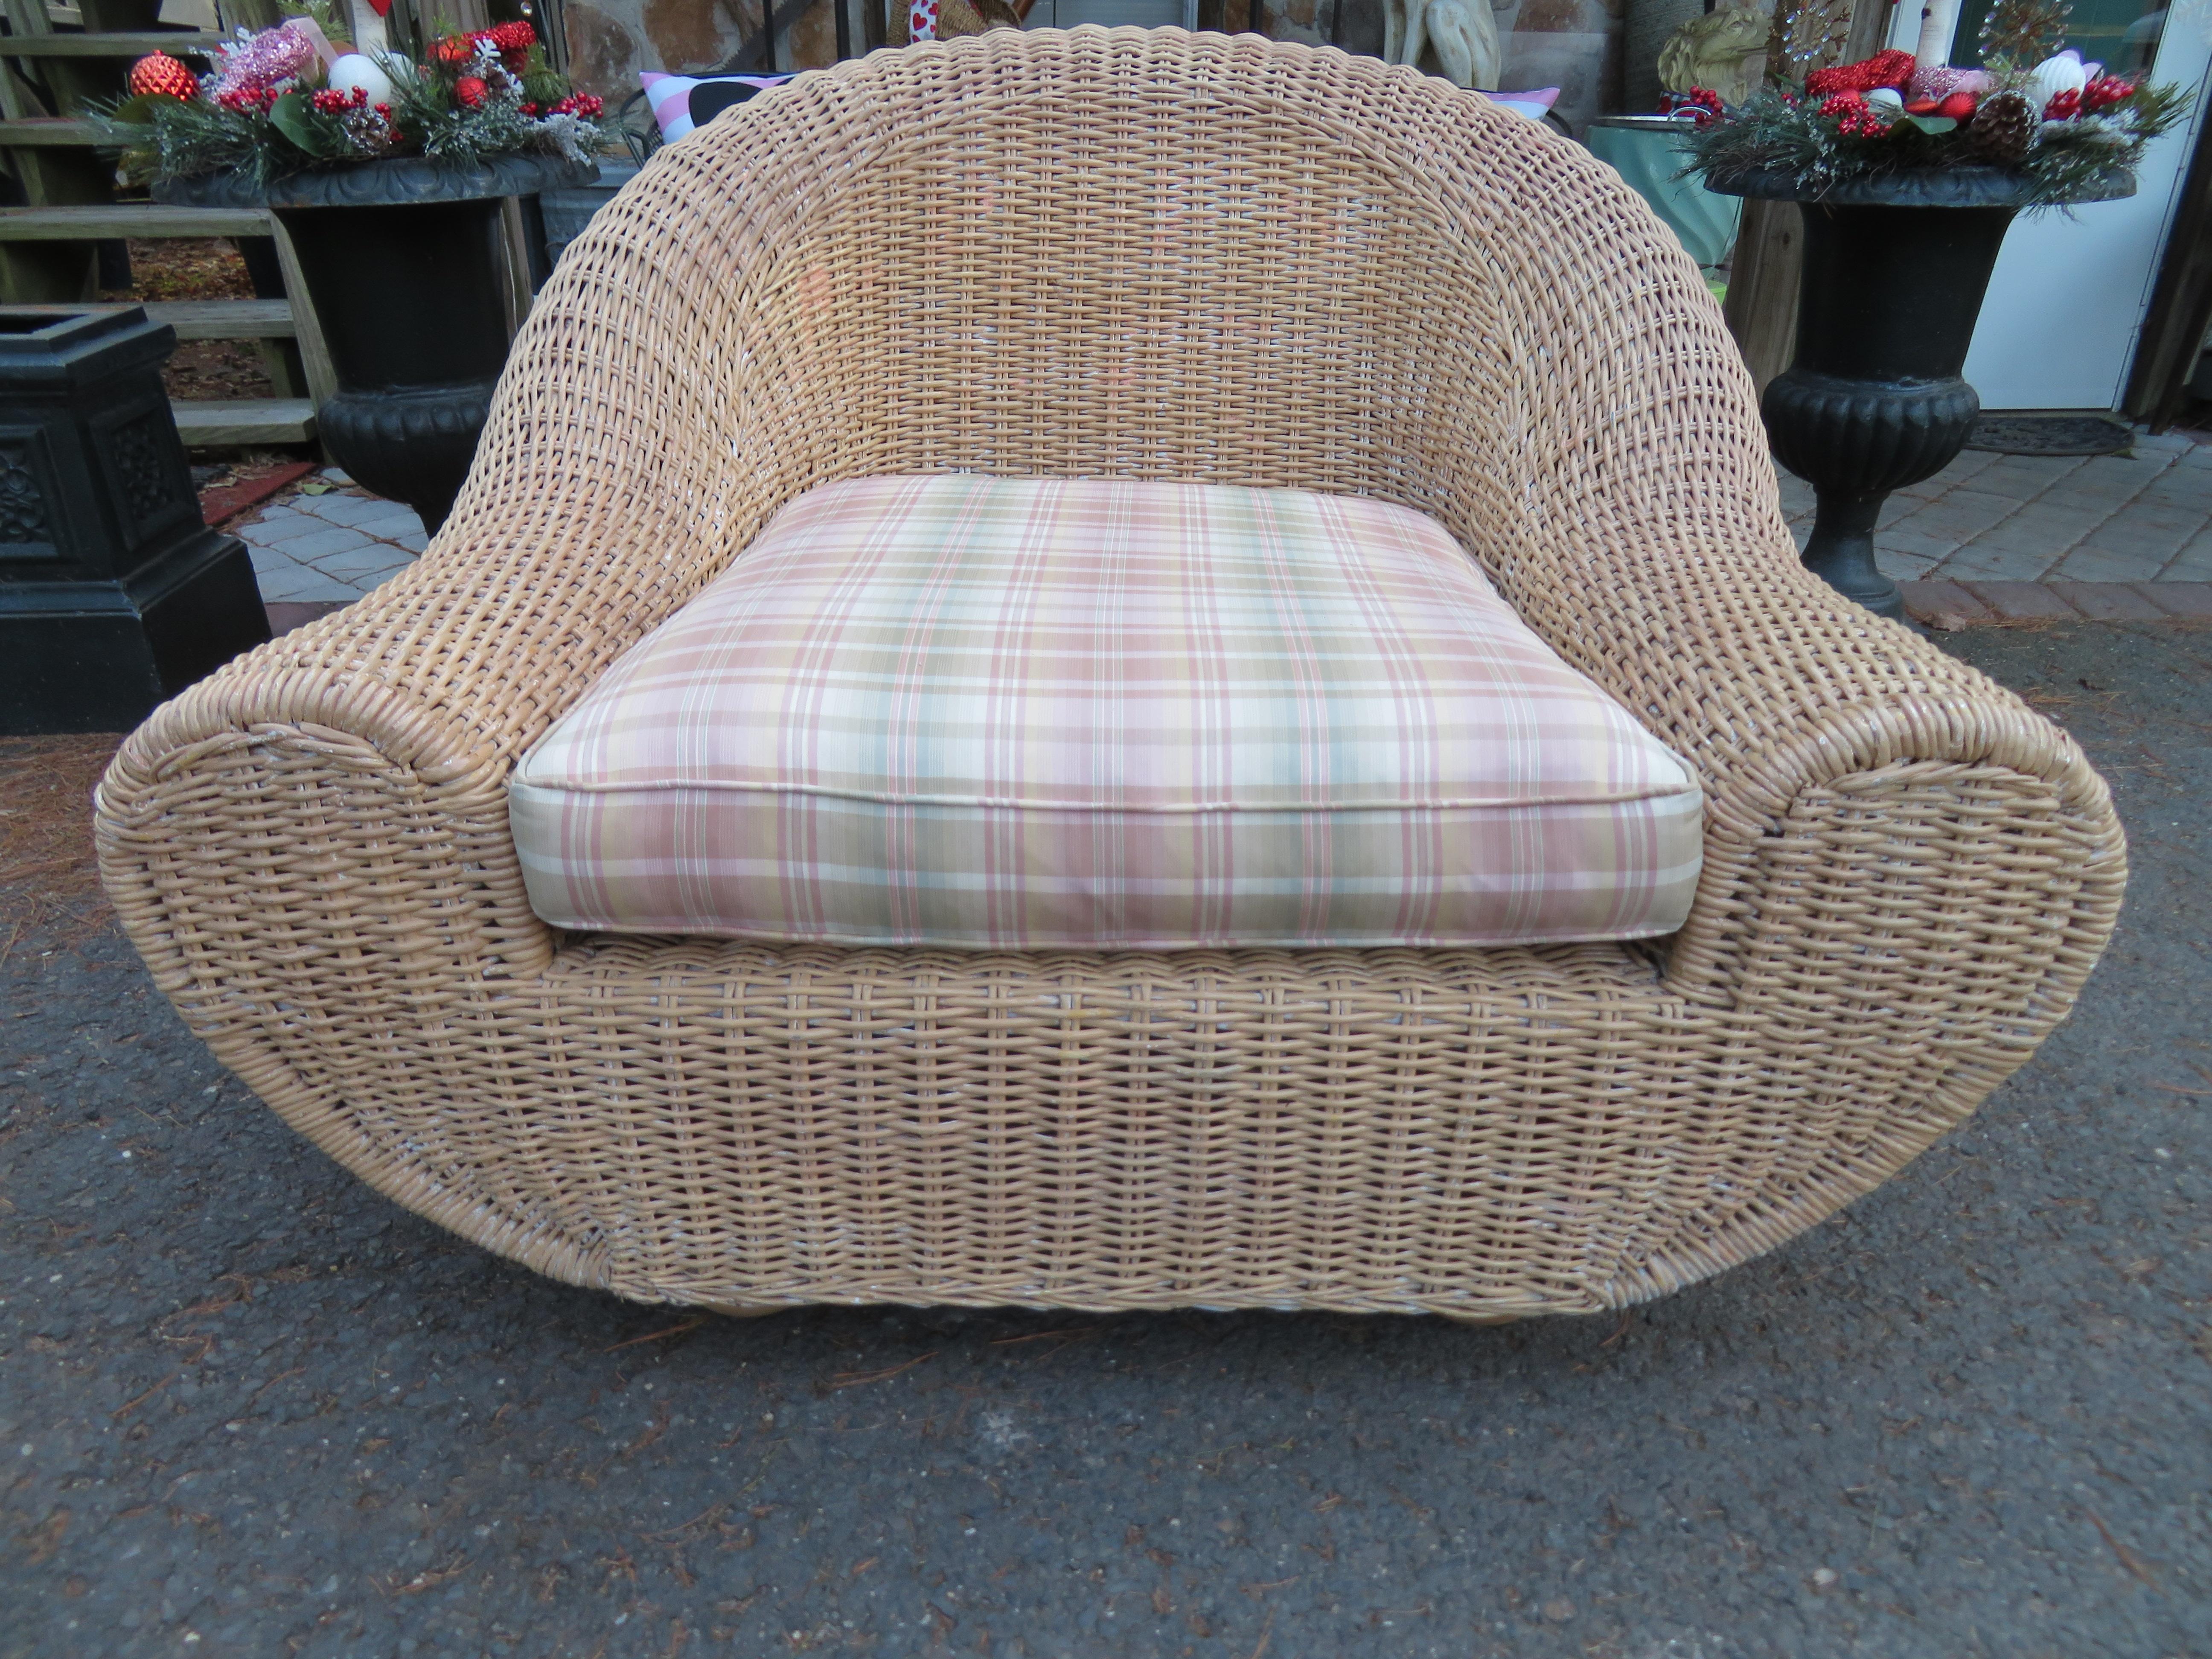 Oversized sculptural wicker chair in the manner of Michael Taylor or Eero Aarnio. We love the large scale and unusual shape of the wonderful vintage wicker chair. It measures 34